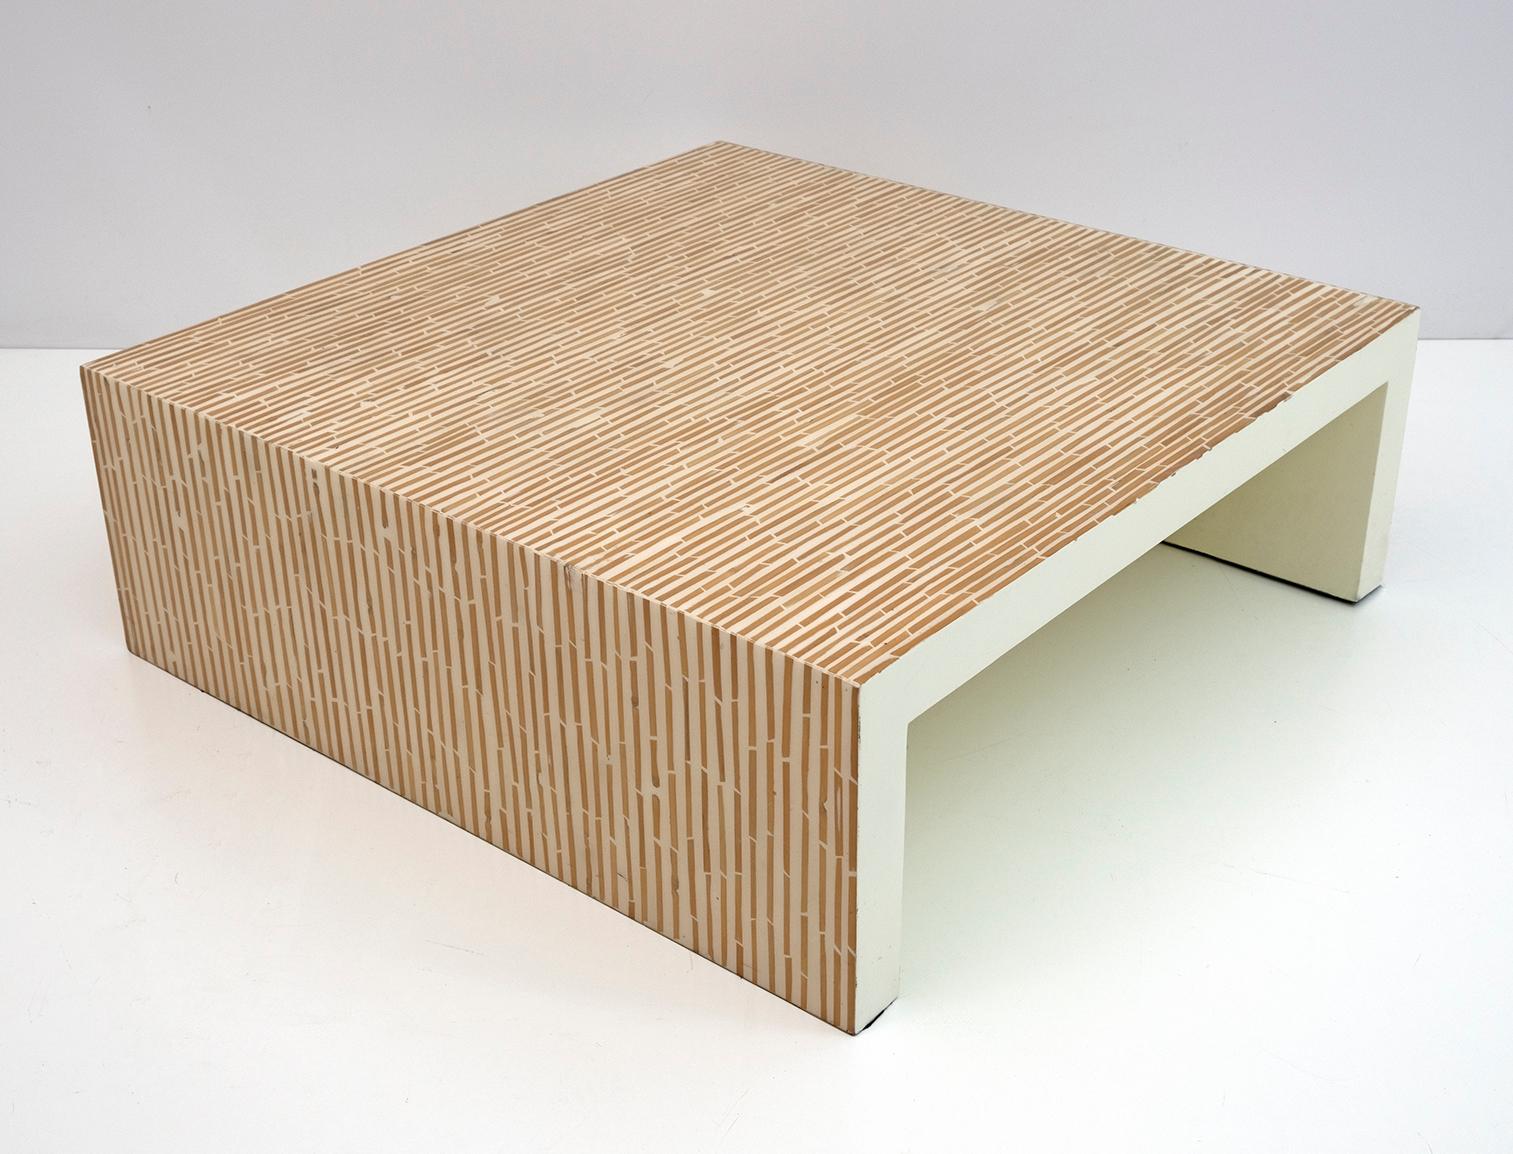 Modern coffee table, unique fusion of modern and natural elements. Each piece of natural bamboo is carefully embedded in the resin, which is white to create a sleek and modern aesthetic.